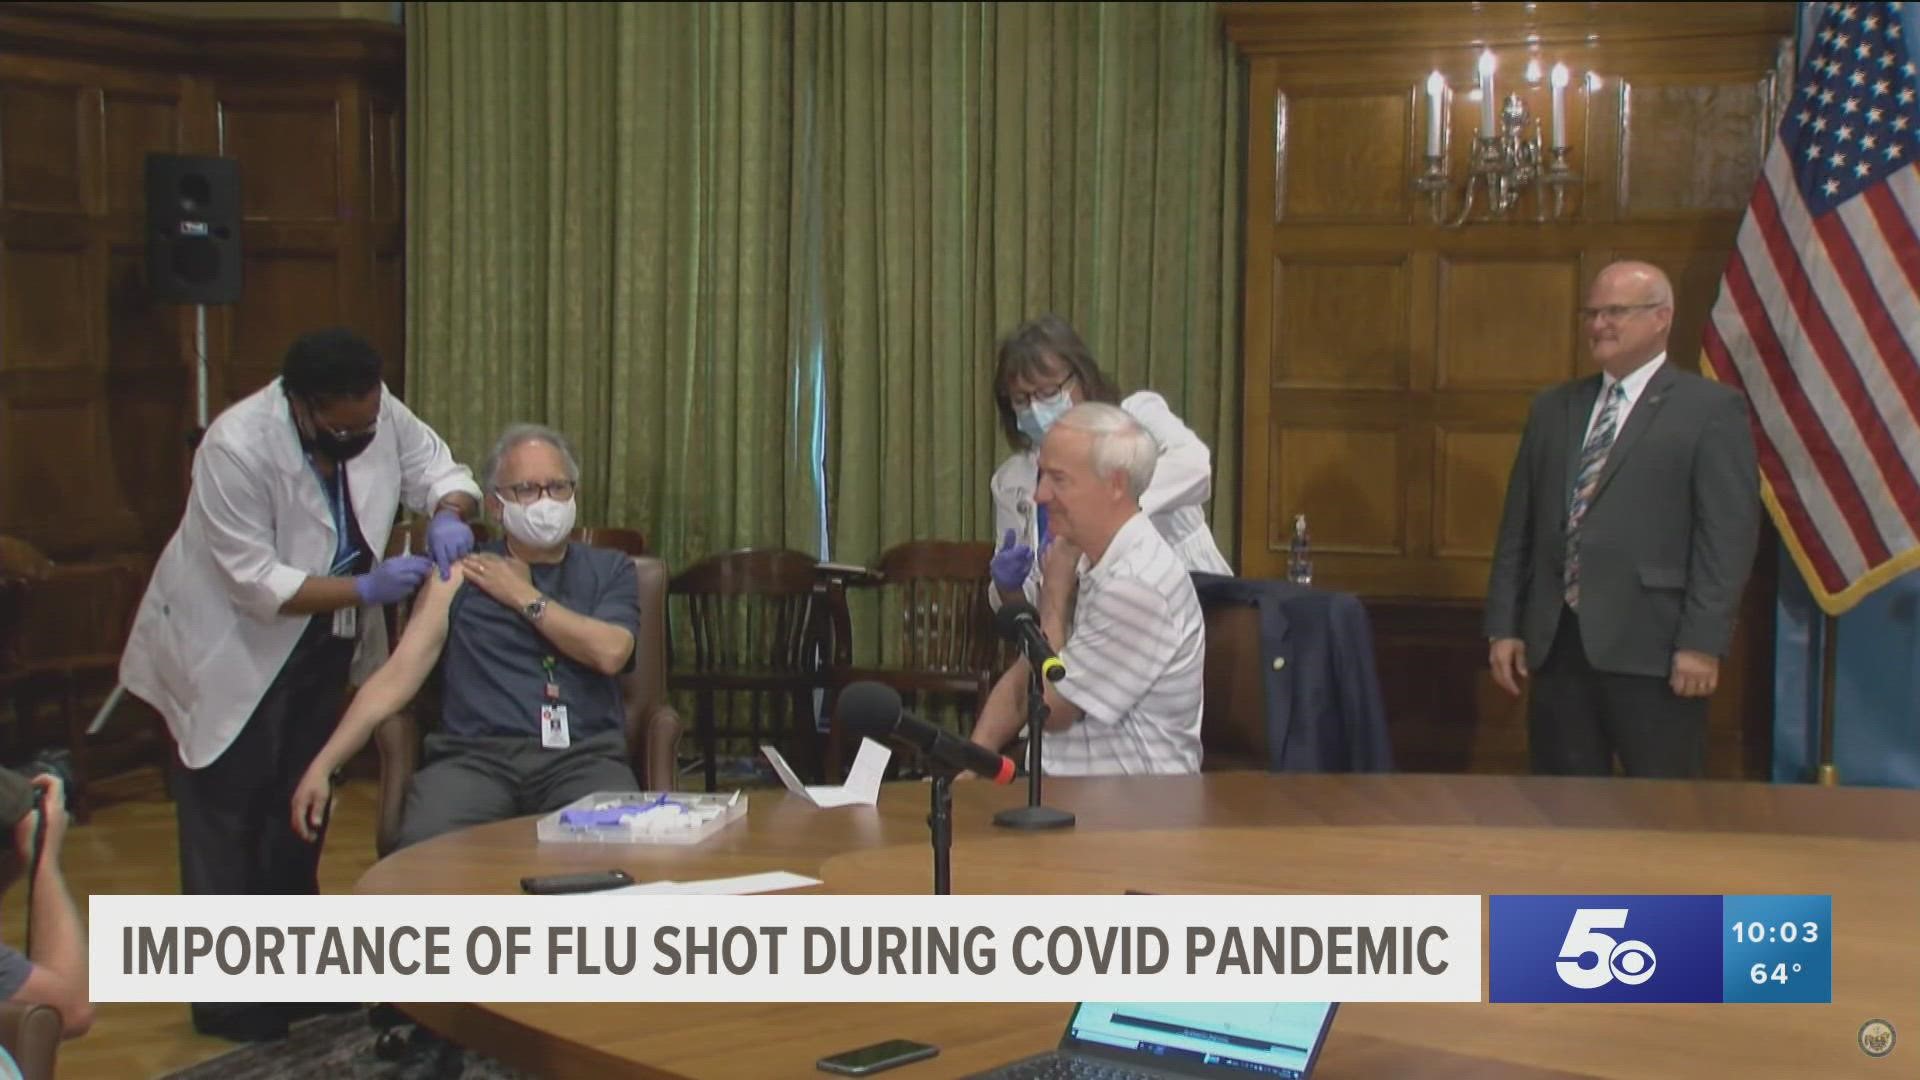 With Flu season is now underway, Arkansas Governor Asa Hutchinson is encouraging residents to take the virus seriously and take proper precautions.